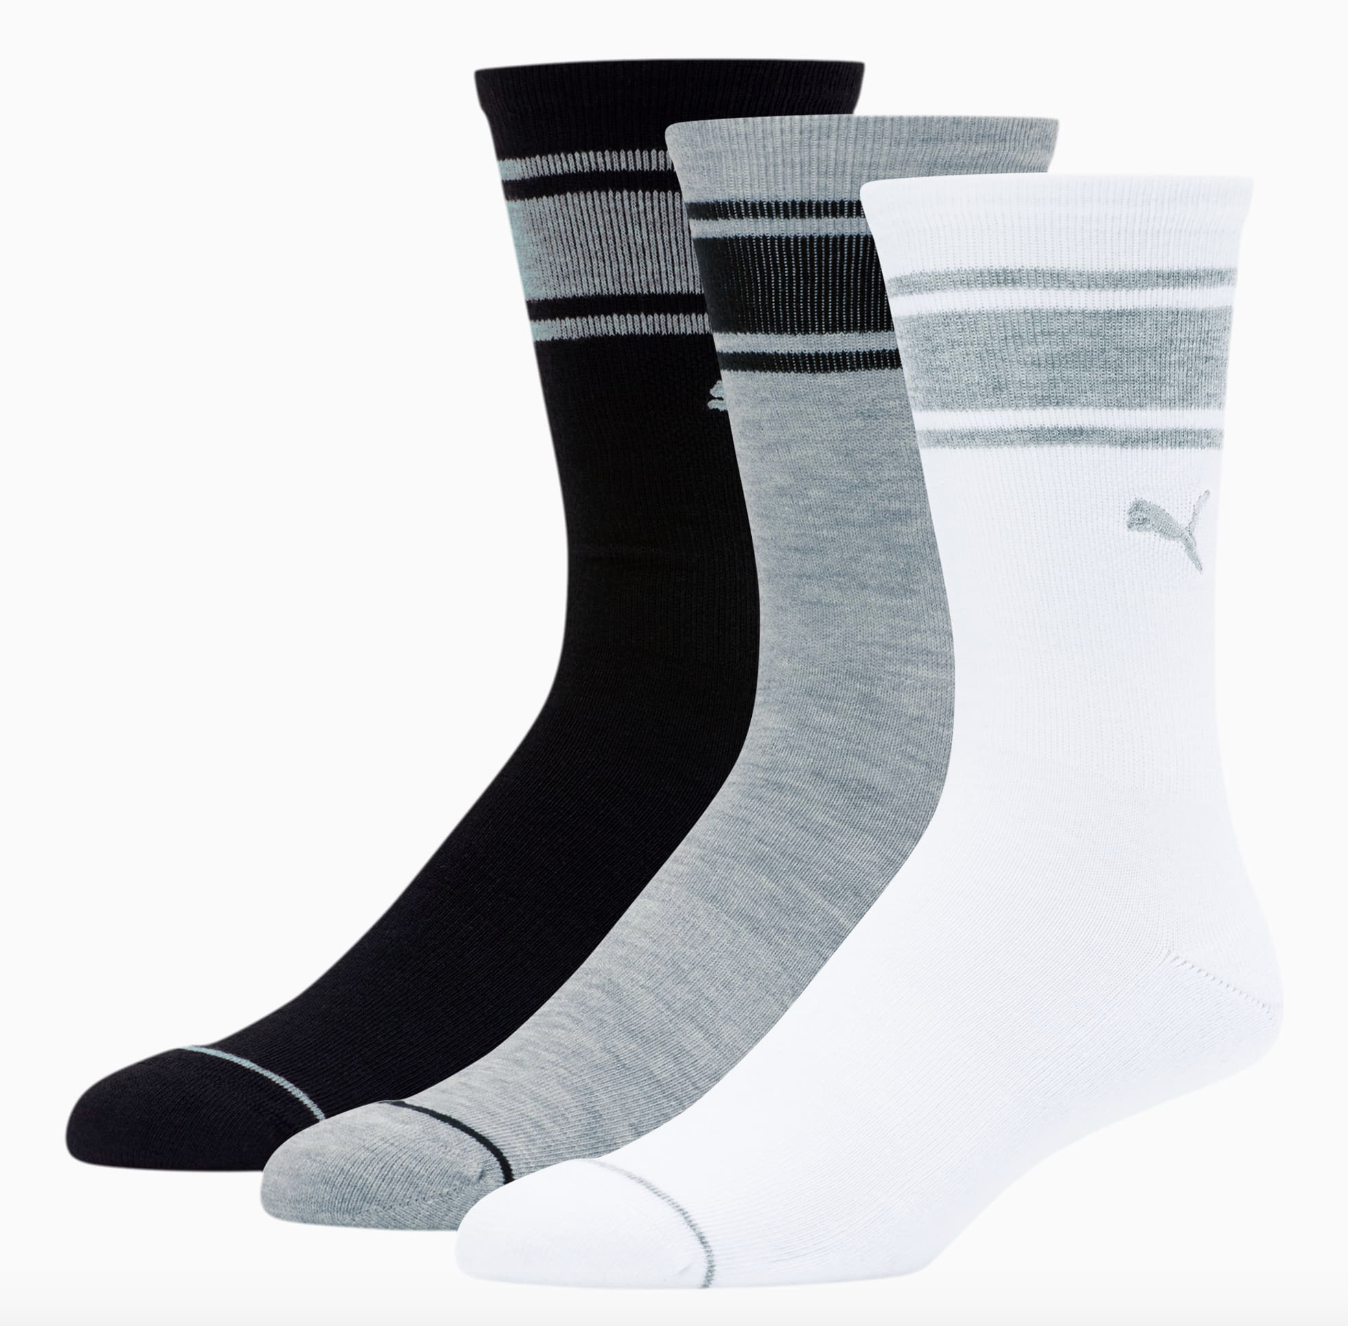 The crew socks in black, white, and gray